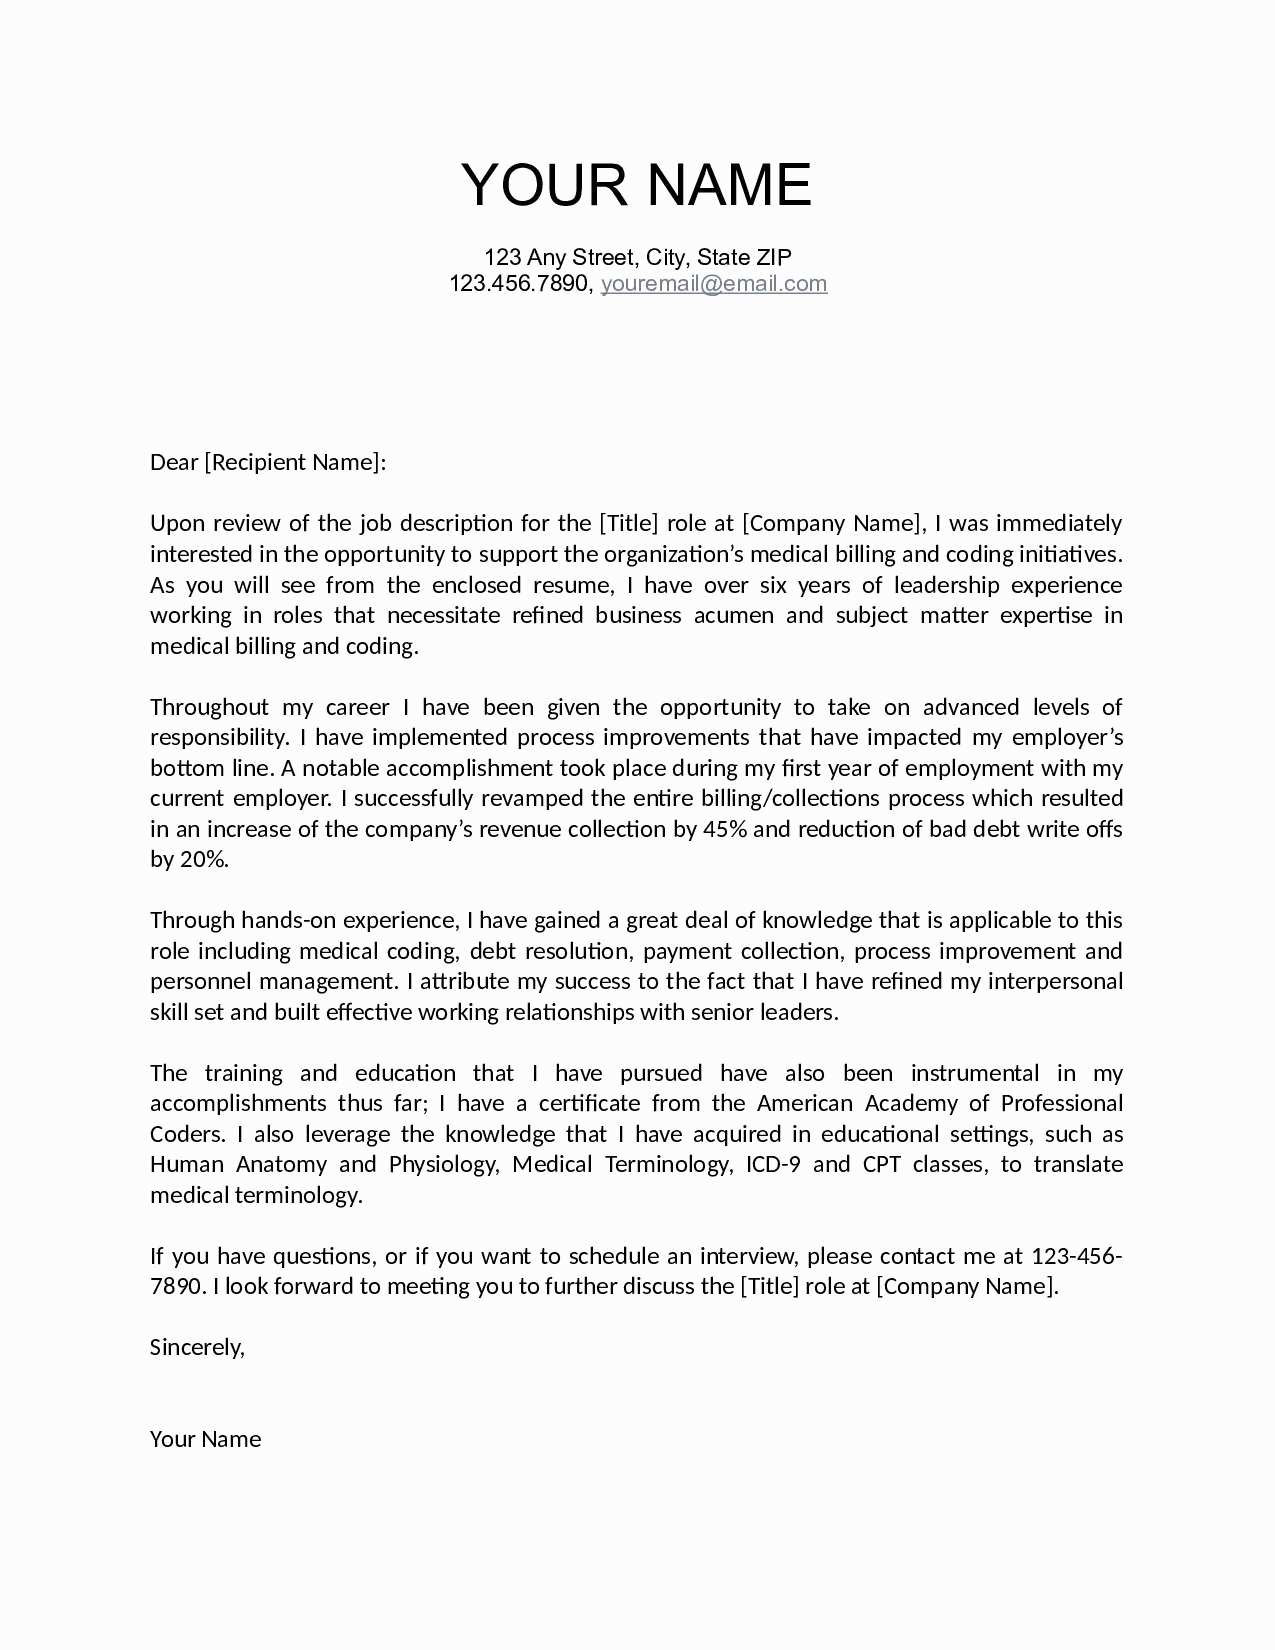 Opt Offer Letter Template - Beautiful Resume and Cover Letter Template